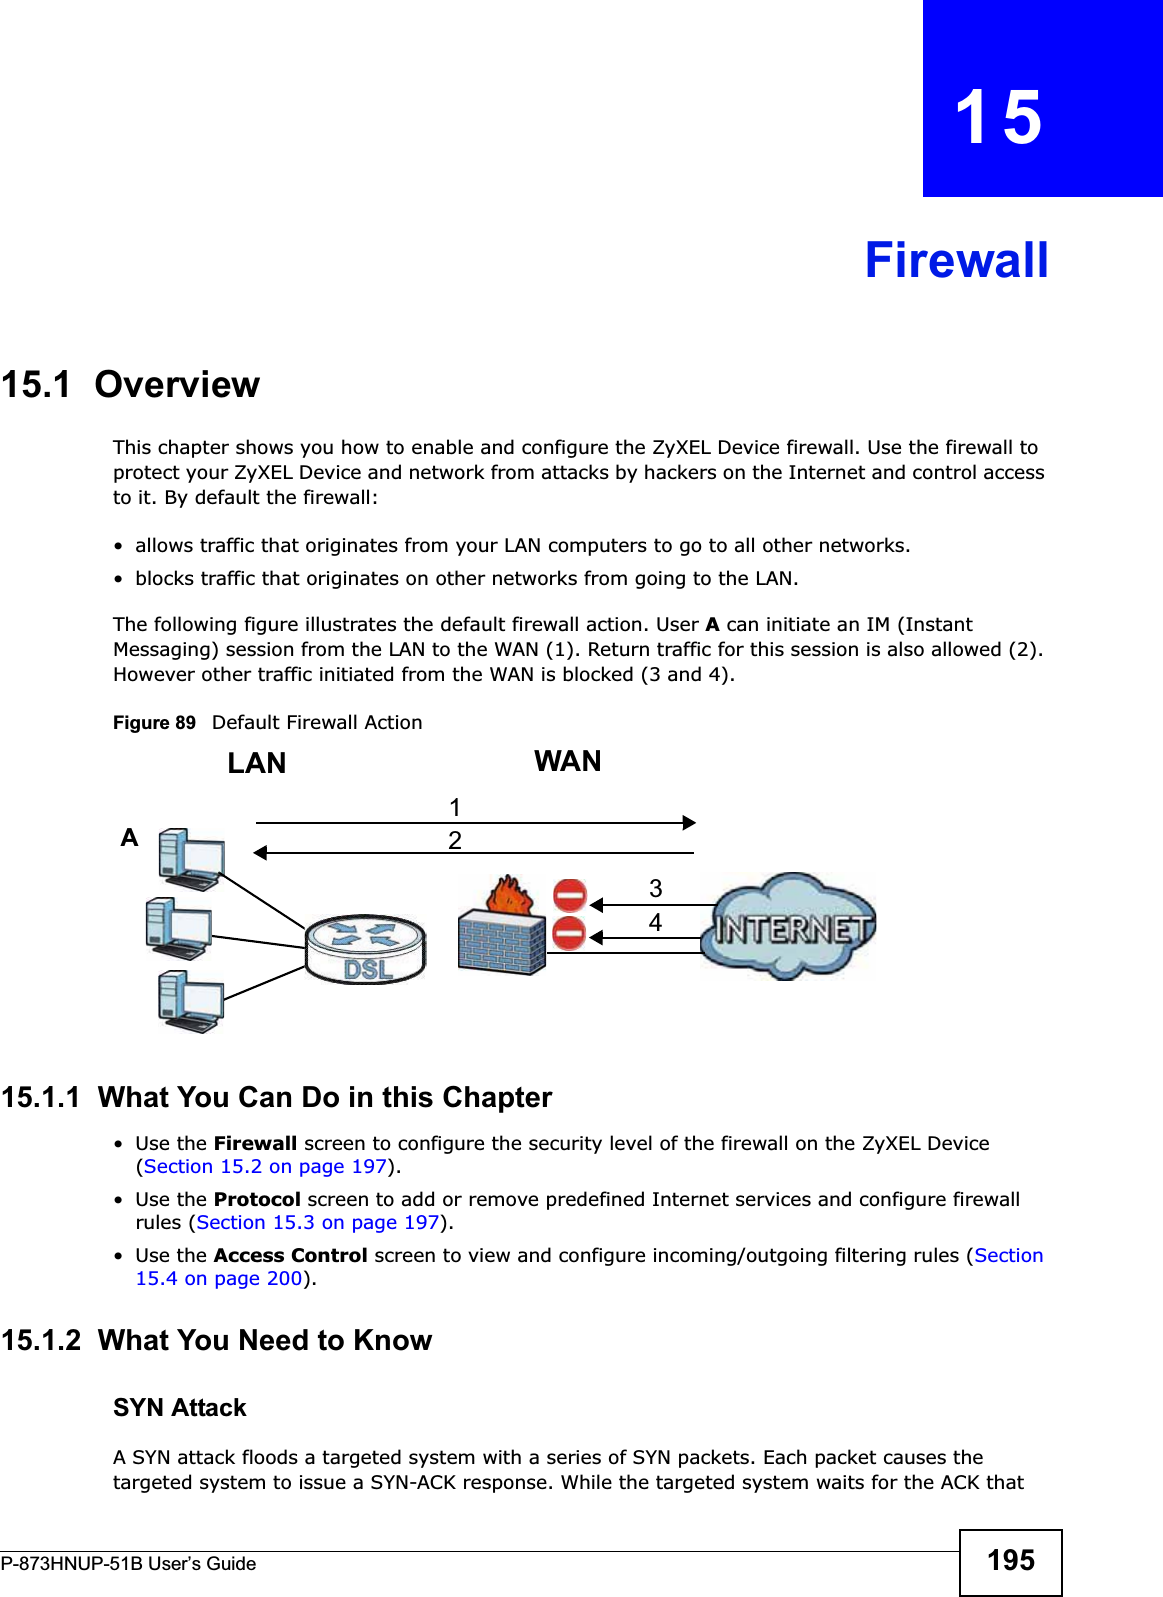 P-873HNUP-51B User’s Guide 195CHAPTER   15Firewall15.1  OverviewThis chapter shows you how to enable and configure the ZyXEL Device firewall. Use the firewall to protect your ZyXEL Device and network from attacks by hackers on the Internet and control access to it. By default the firewall:• allows traffic that originates from your LAN computers to go to all other networks. • blocks traffic that originates on other networks from going to the LAN. The following figure illustrates the default firewall action. User A can initiate an IM (Instant Messaging) session from the LAN to the WAN (1). Return traffic for this session is also allowed (2). However other traffic initiated from the WAN is blocked (3 and 4).Figure 89   Default Firewall Action15.1.1  What You Can Do in this Chapter•Use the Firewall screen to configure the security level of the firewall on the ZyXEL Device (Section 15.2 on page 197).•Use the Protocol screen to add or remove predefined Internet services and configure firewall rules (Section 15.3 on page 197).•Use the Access Control screen to view and configure incoming/outgoing filtering rules (Section 15.4 on page 200).15.1.2  What You Need to KnowSYN AttackA SYN attack floods a targeted system with a series of SYN packets. Each packet causes the targeted system to issue a SYN-ACK response. While the targeted system waits for the ACK that WANLAN3412A